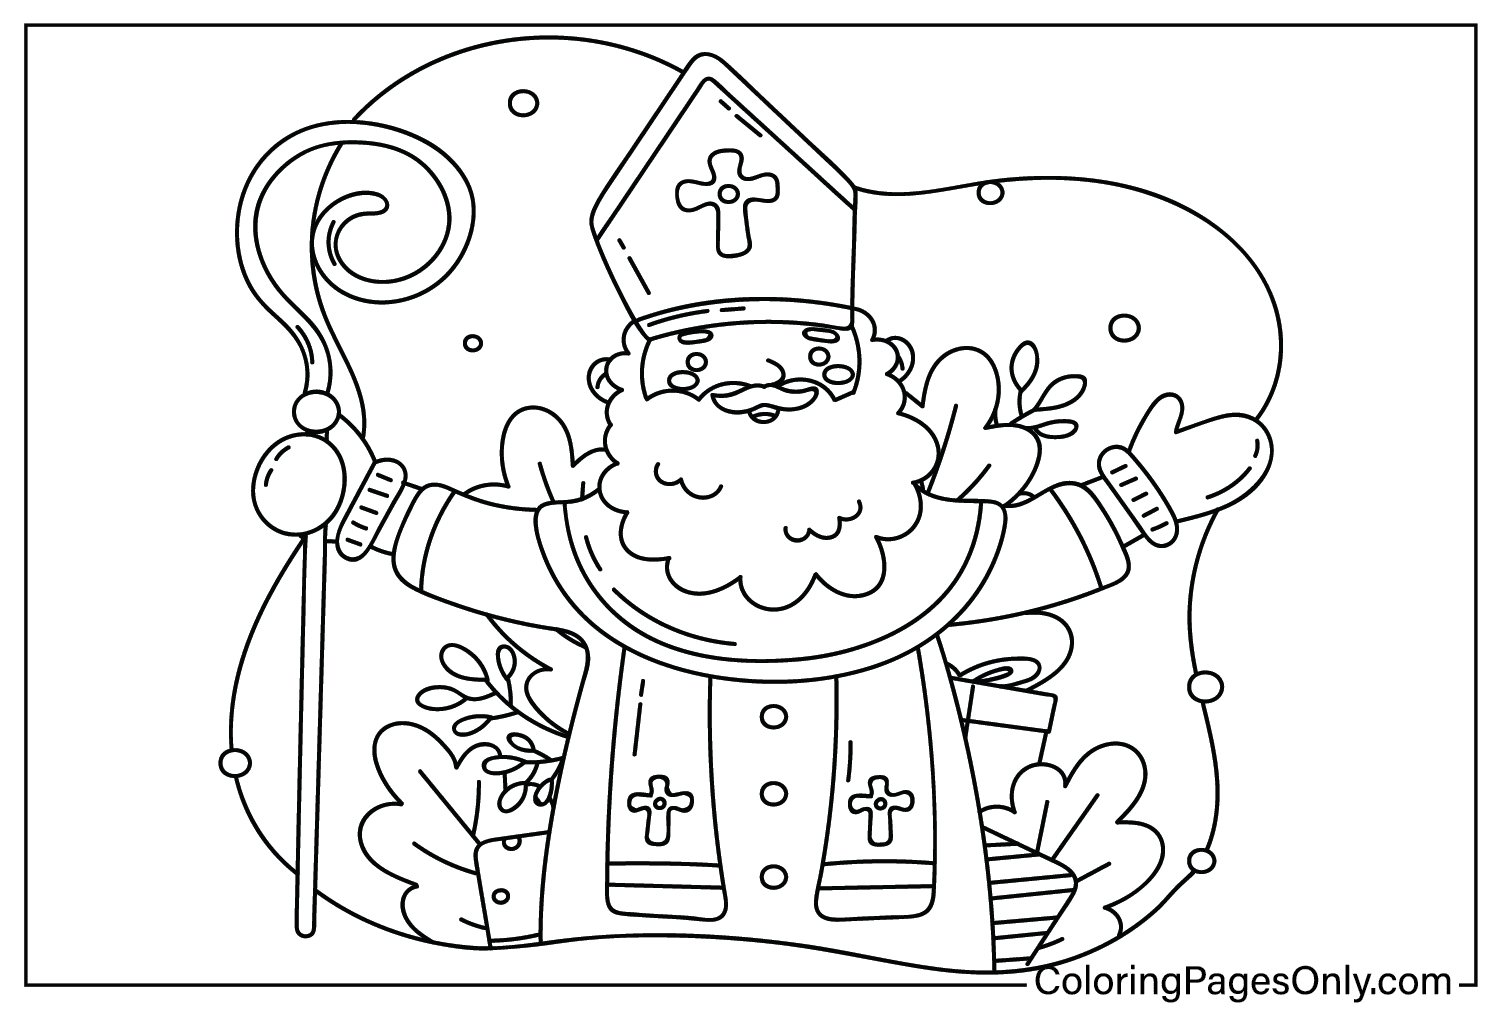 Saint Nicholas Day Coloring Page to Print from Saint Nicholas Day